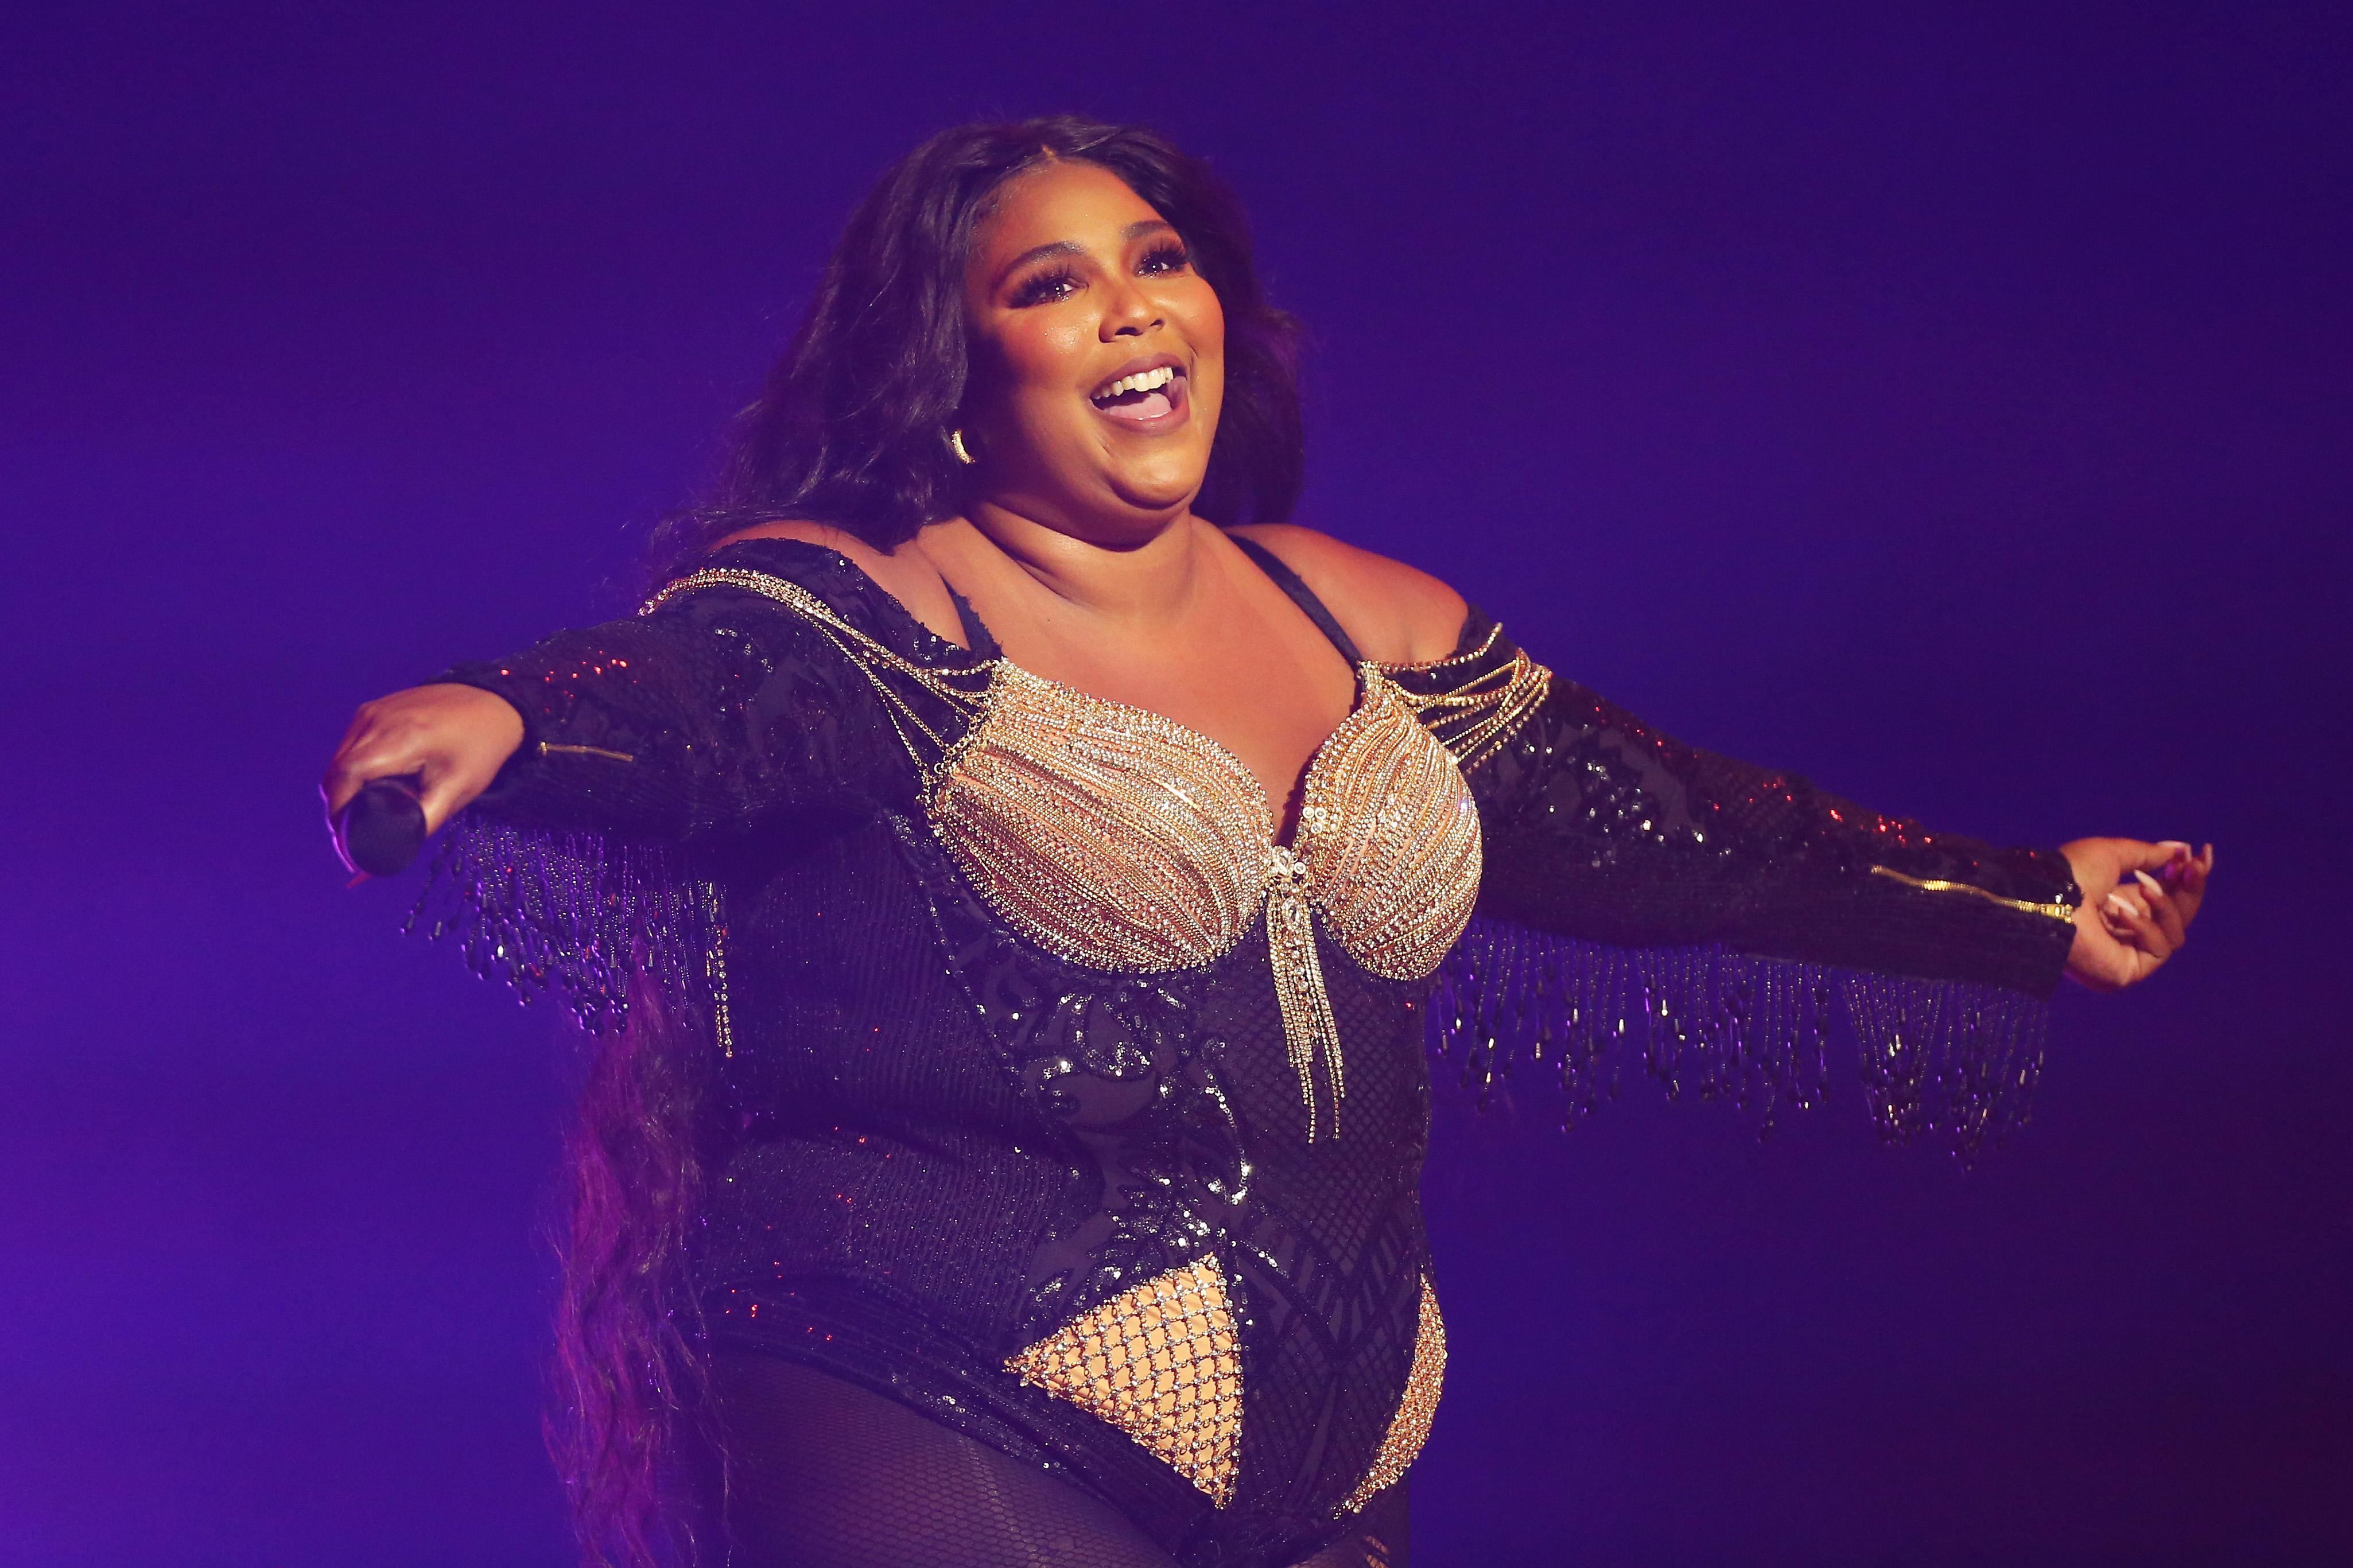 Lizzo Is Tired of People Commenting on Her Weight